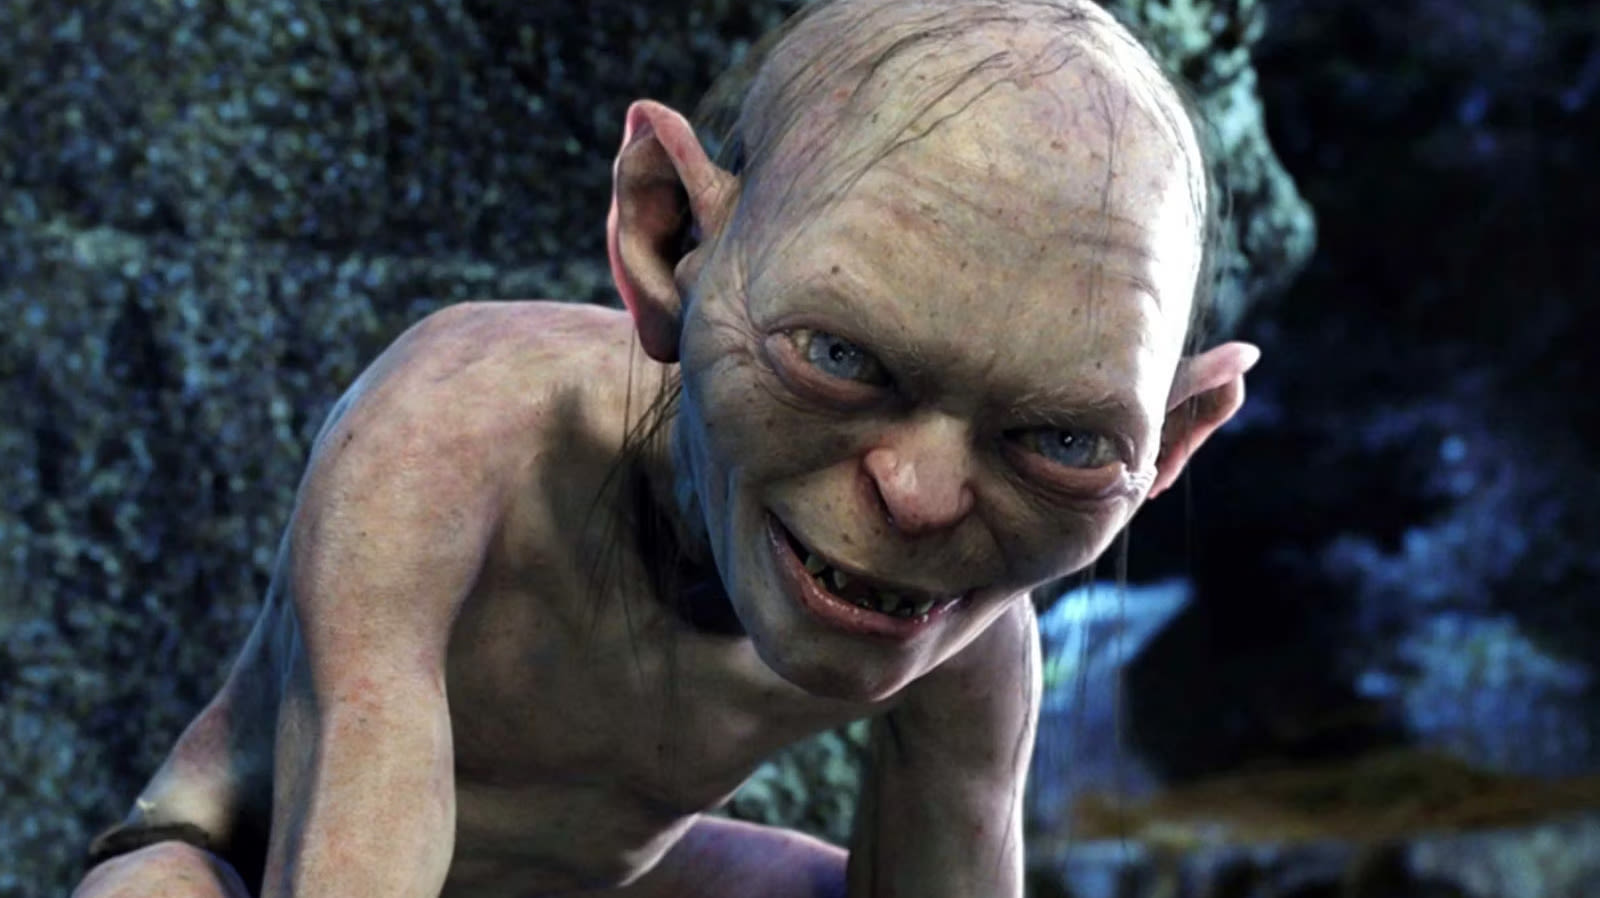 New Lord Of The Rings Movie Lands A Familiar Director, But It's Not Peter Jackson - SlashFilm